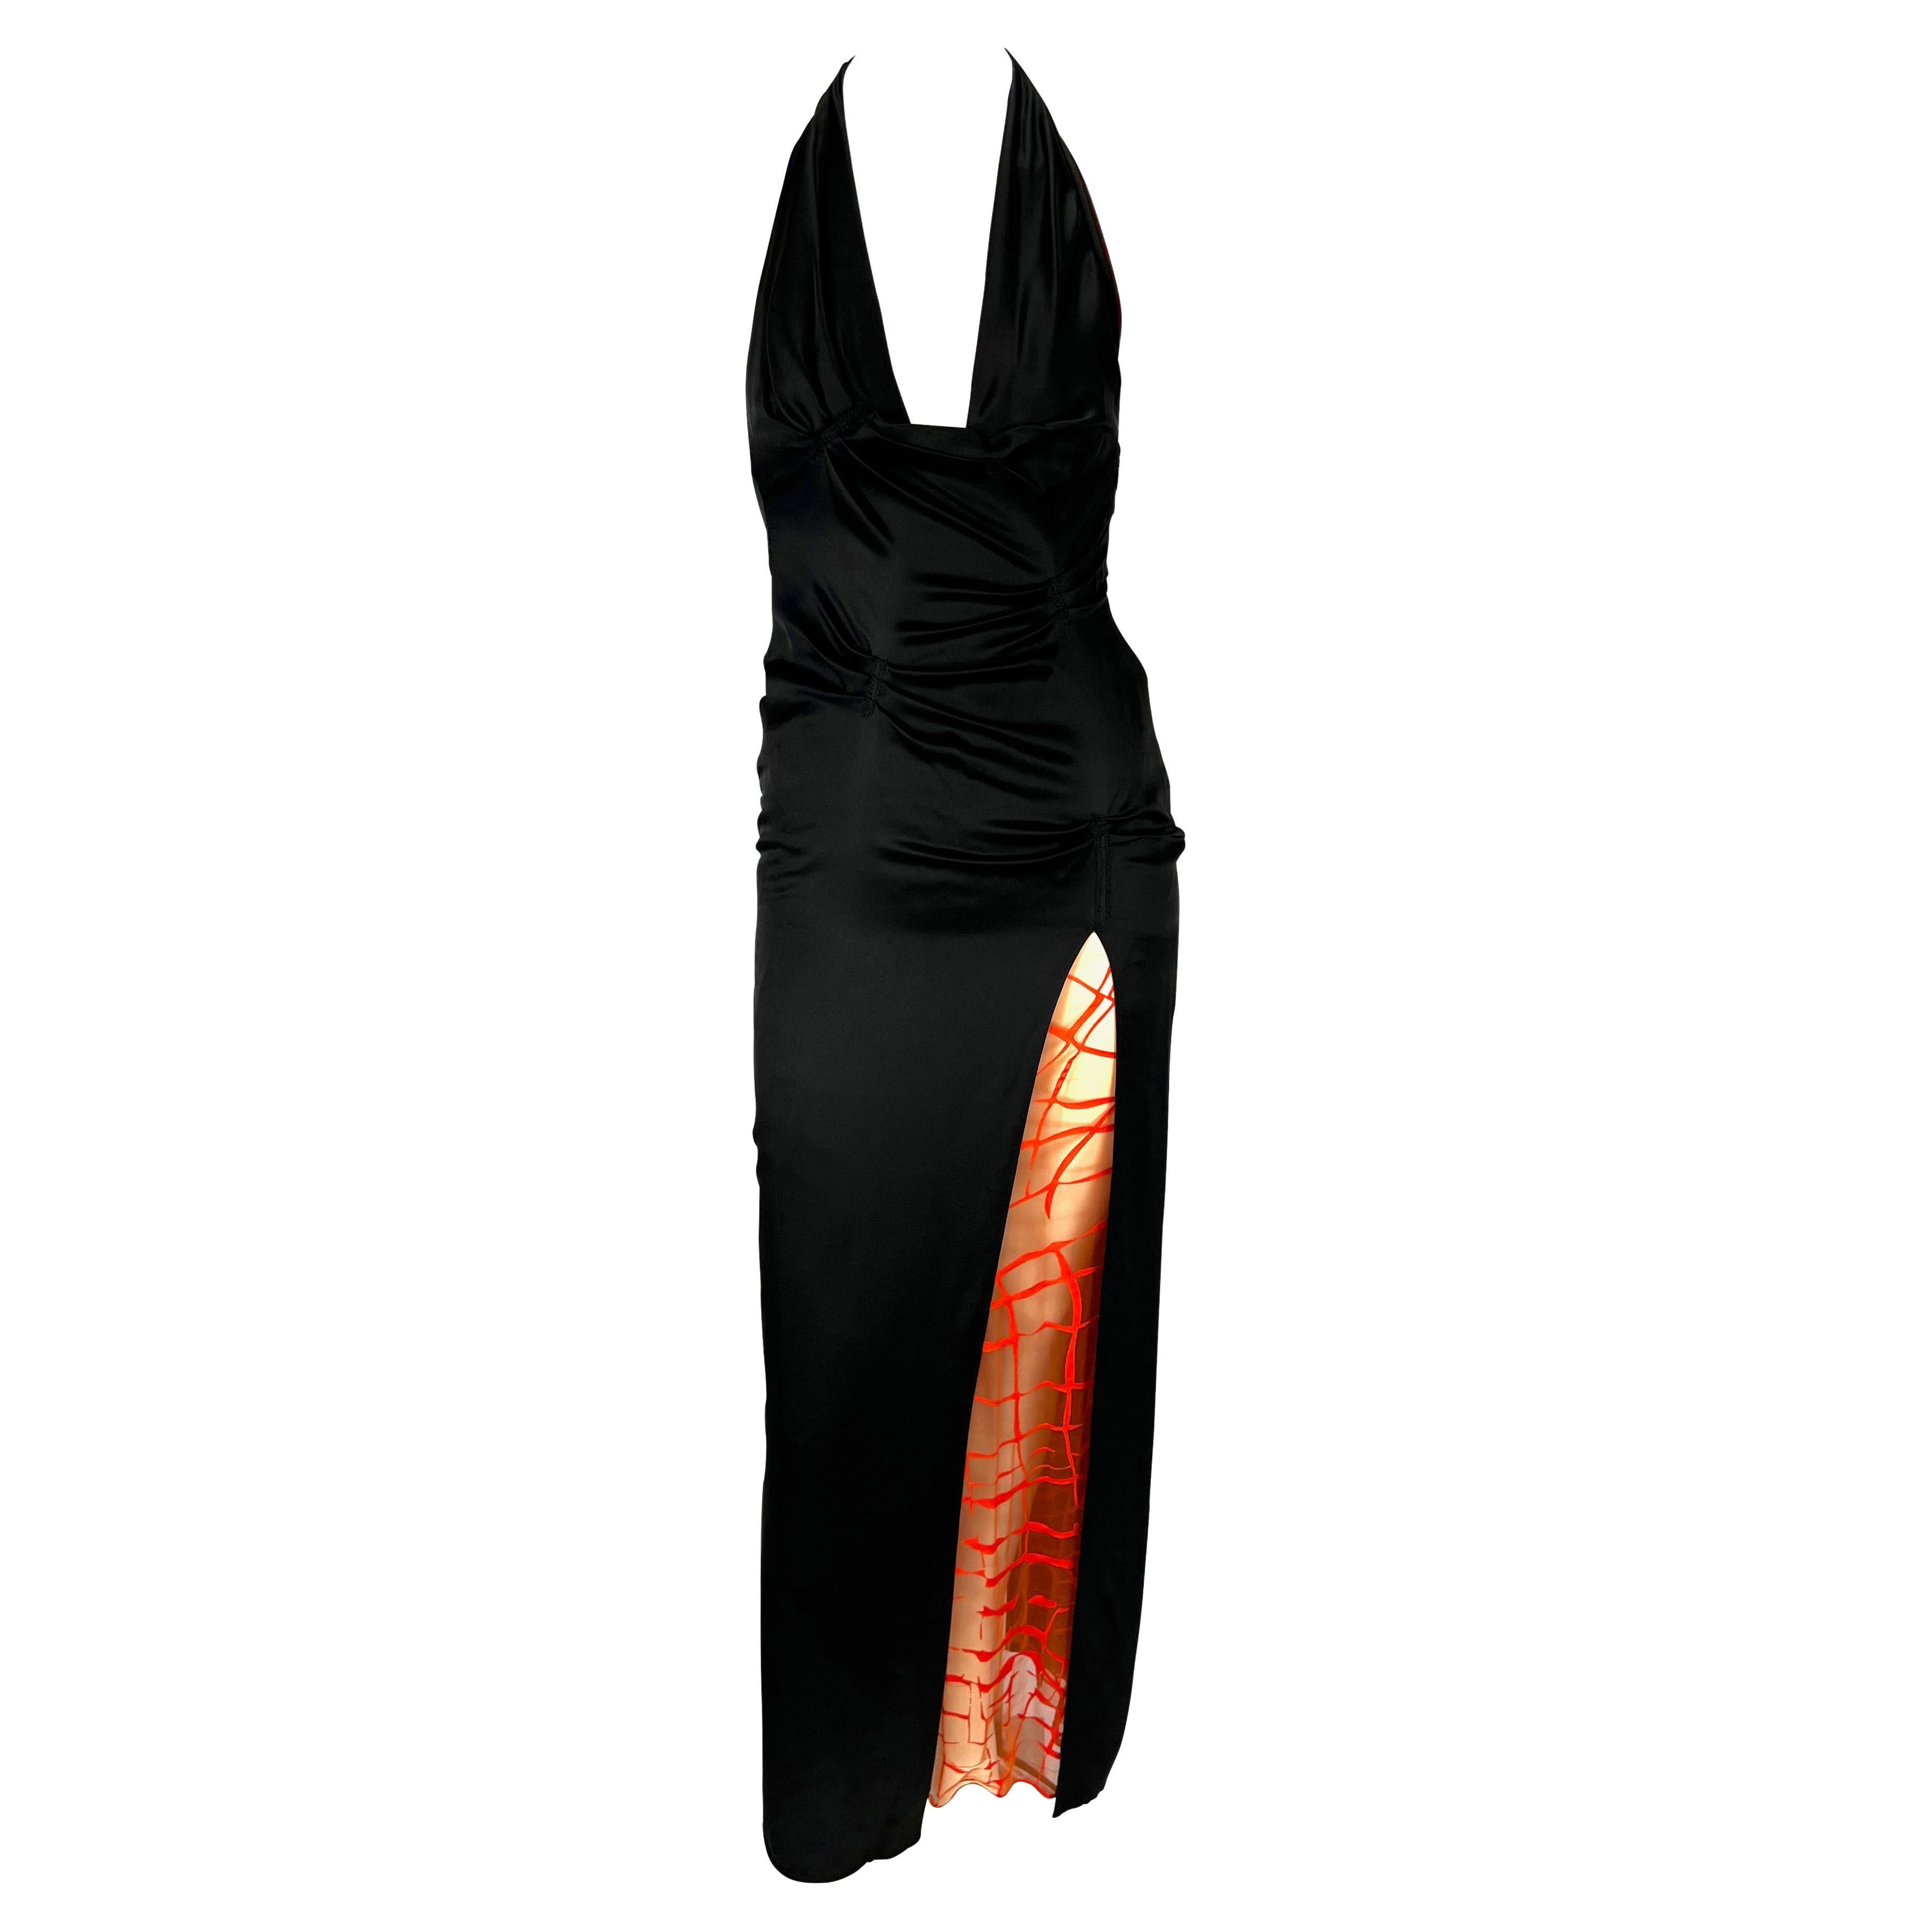 S/S 1999 Gianni Versace by Donatella Ruched Black High-Slit Coral Mesh Dress For Sale